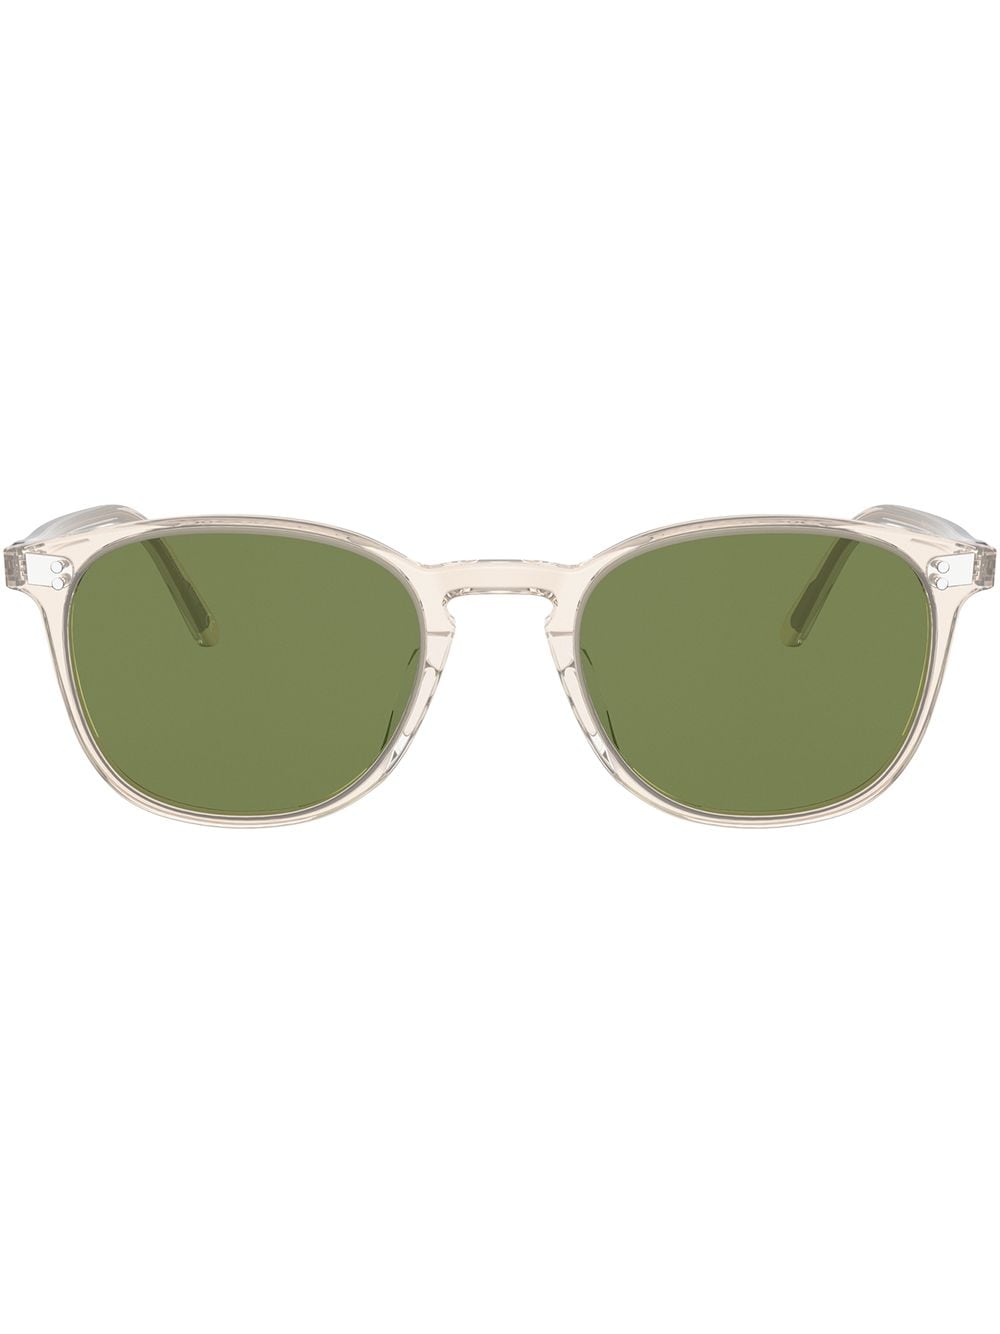 OLIVER PEOPLES FINLEY SUNGLASSES